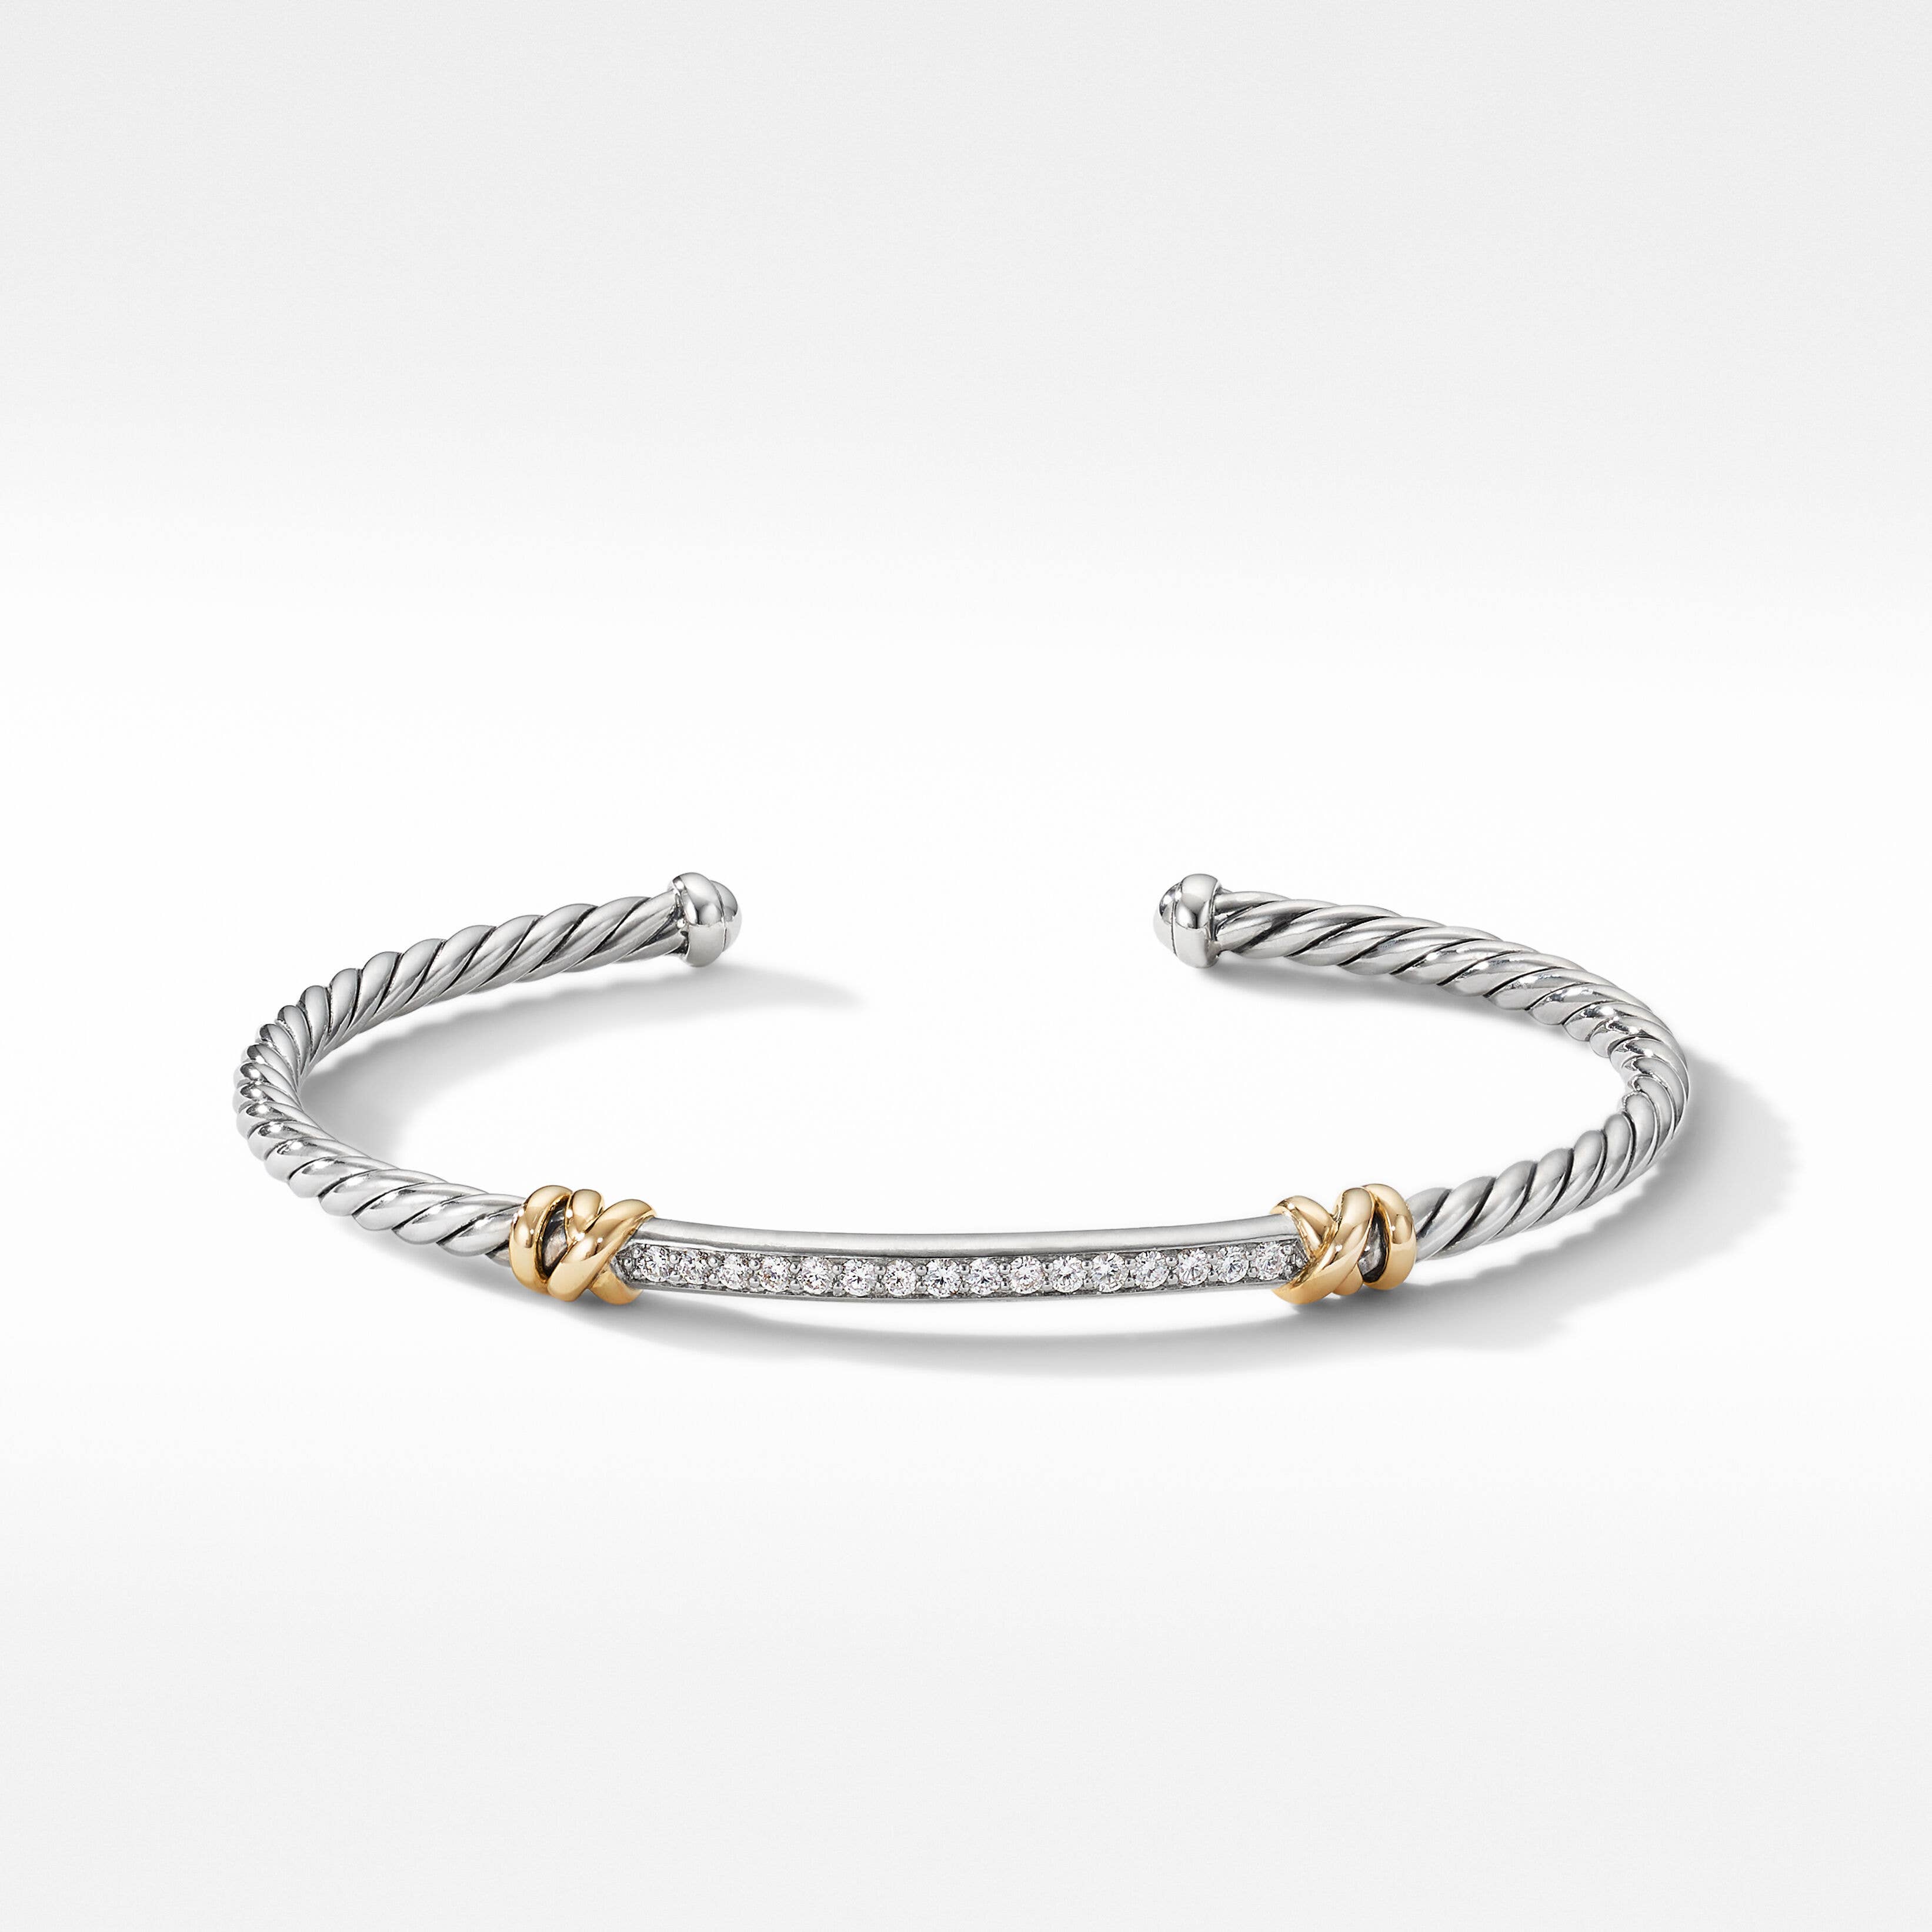 Petite Helena Two Station Wrap Bracelet in Sterling Silver with 18K Yellow Gold with Pavé Diamonds